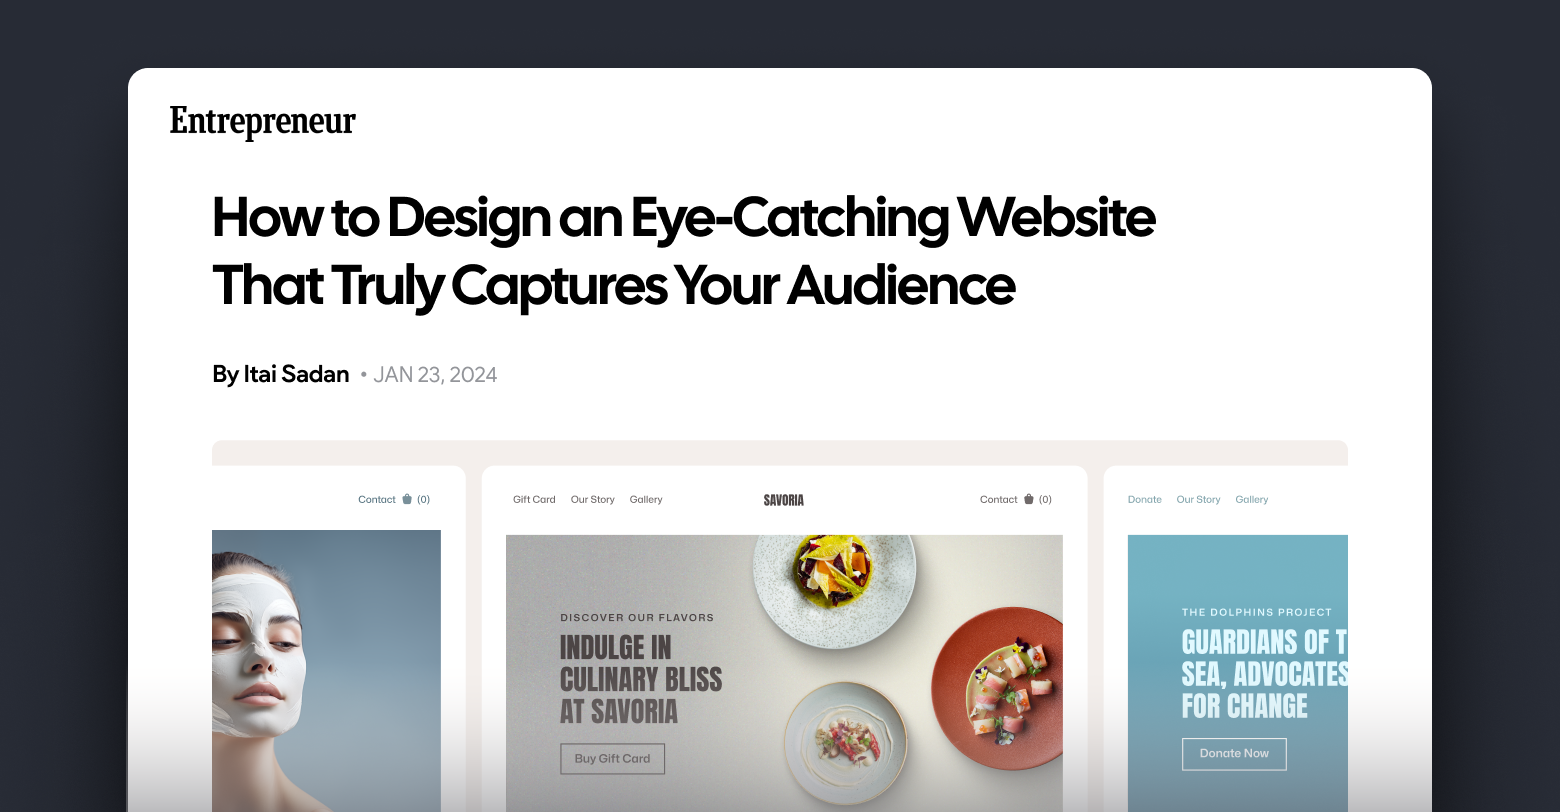 Entrepreneur's logo and How to design an eye-catching website that truly captures your audience.